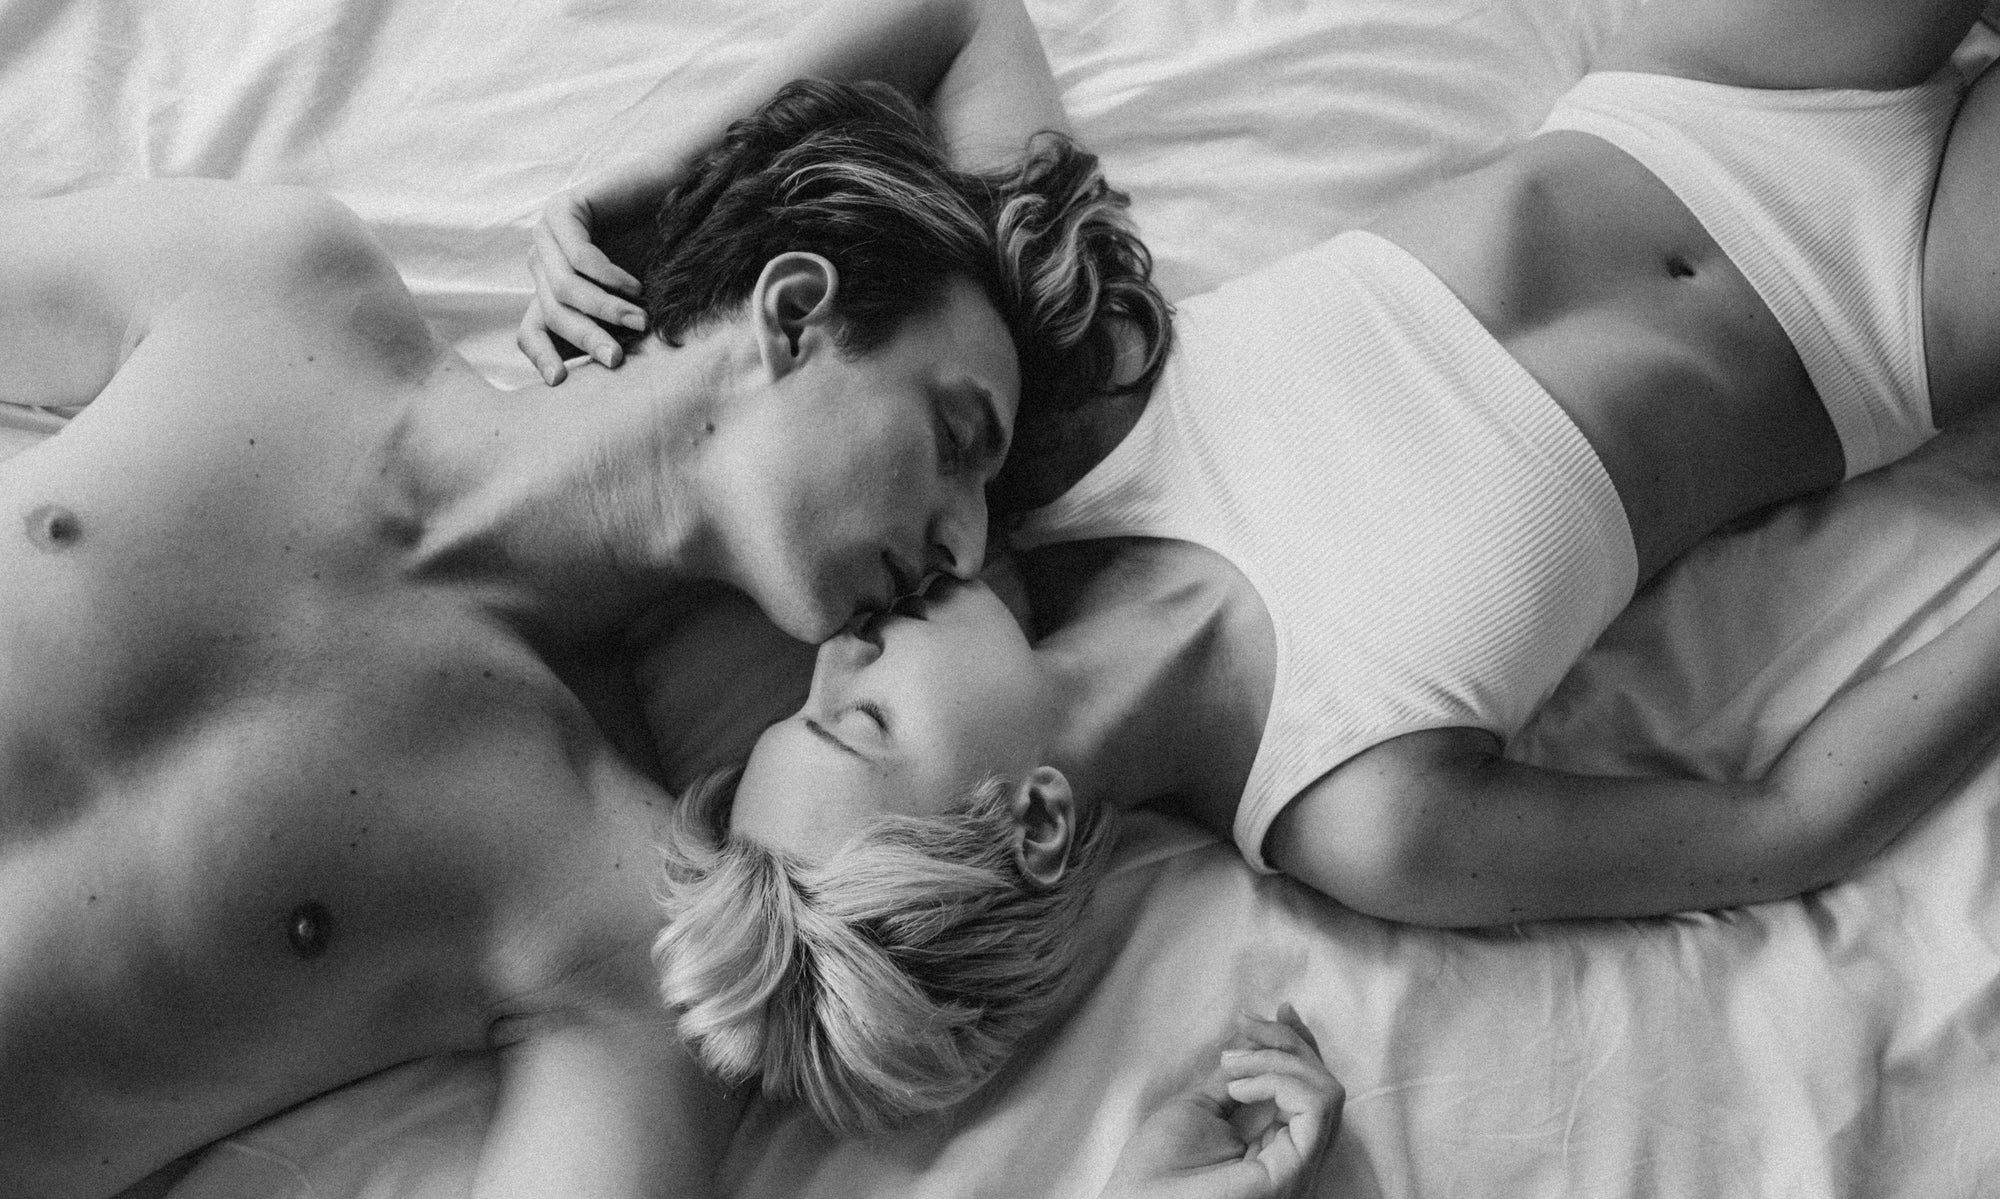 Black n white image of an erotic couple kissing on bed.